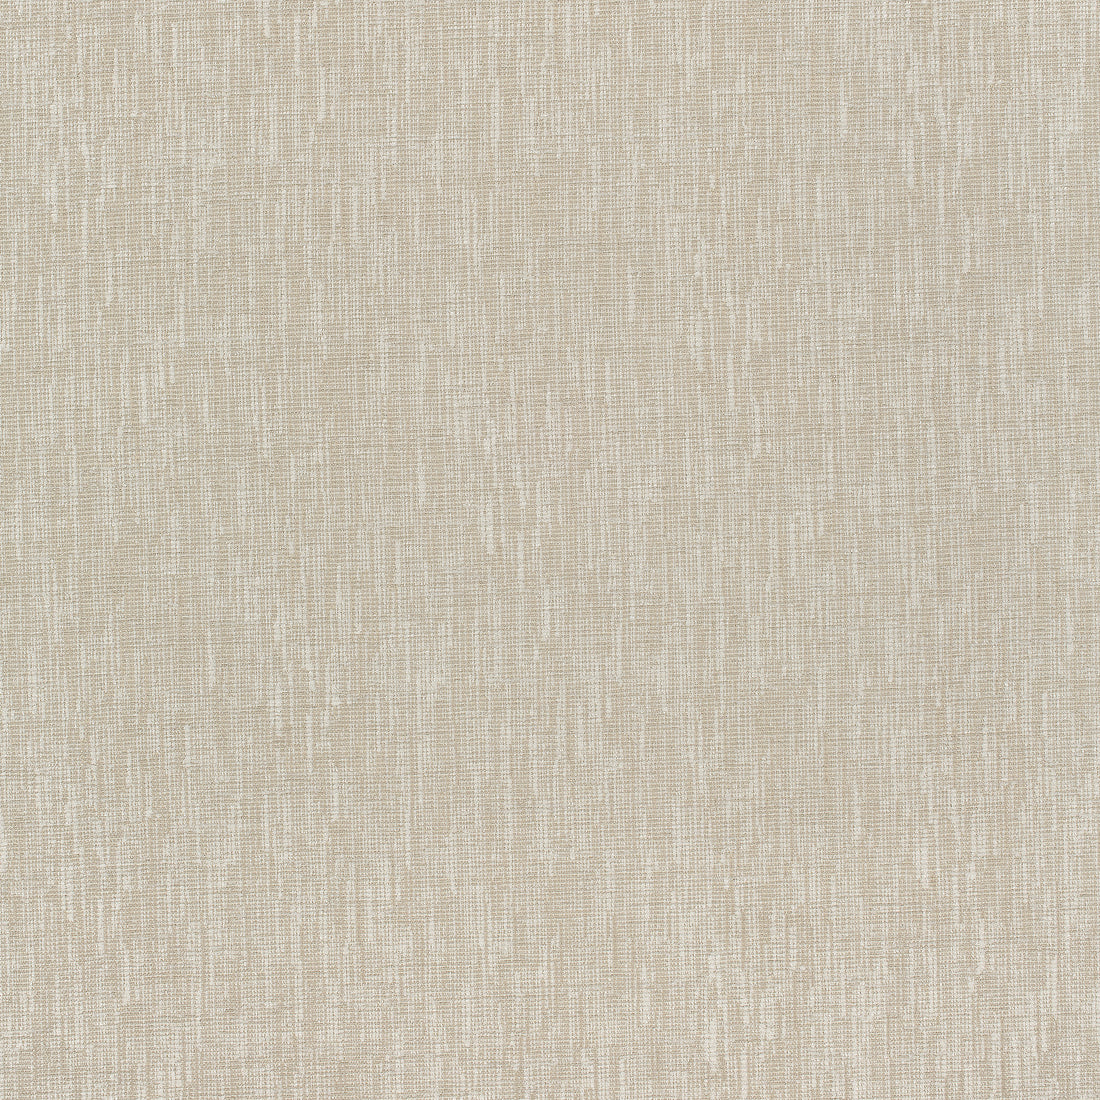 Montage fabric in linen color - pattern number W80478 - by Thibaut in the Mosaic collection